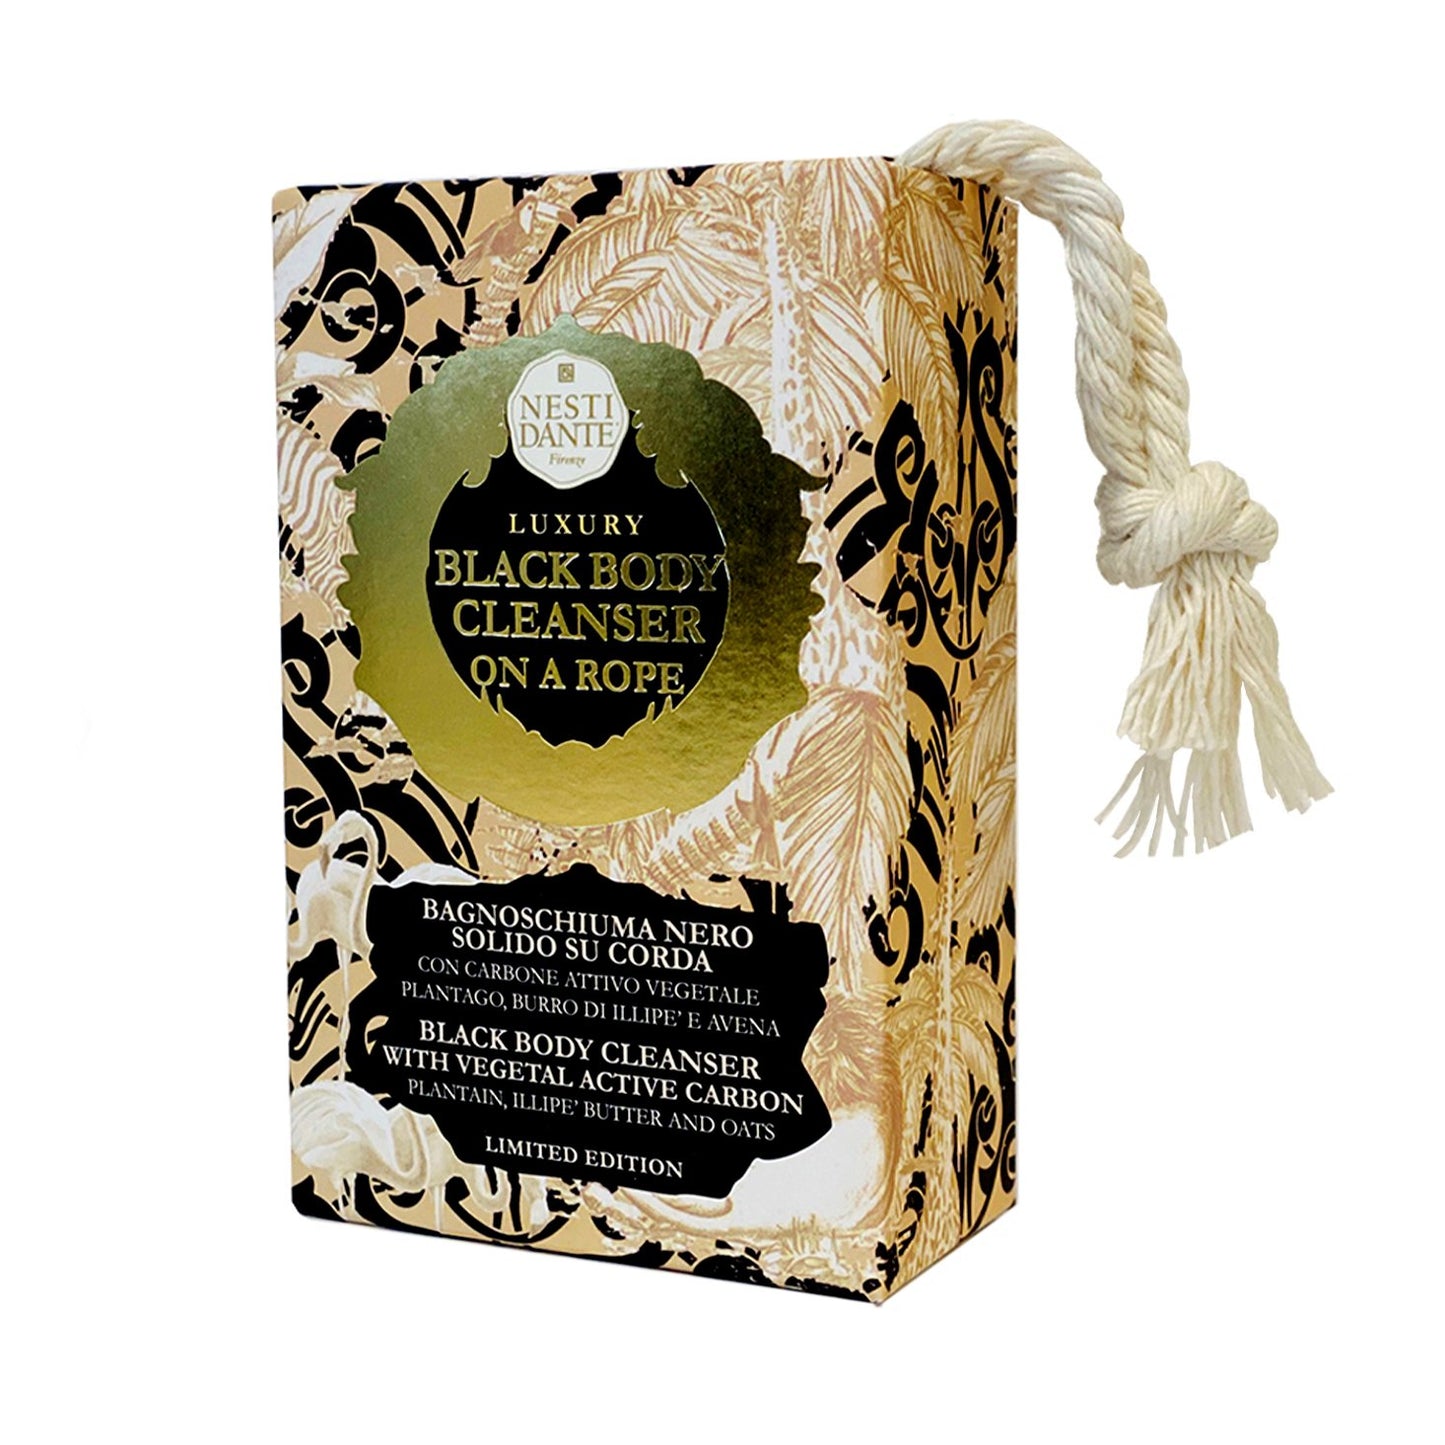 Luxury Black Soap on a Rope